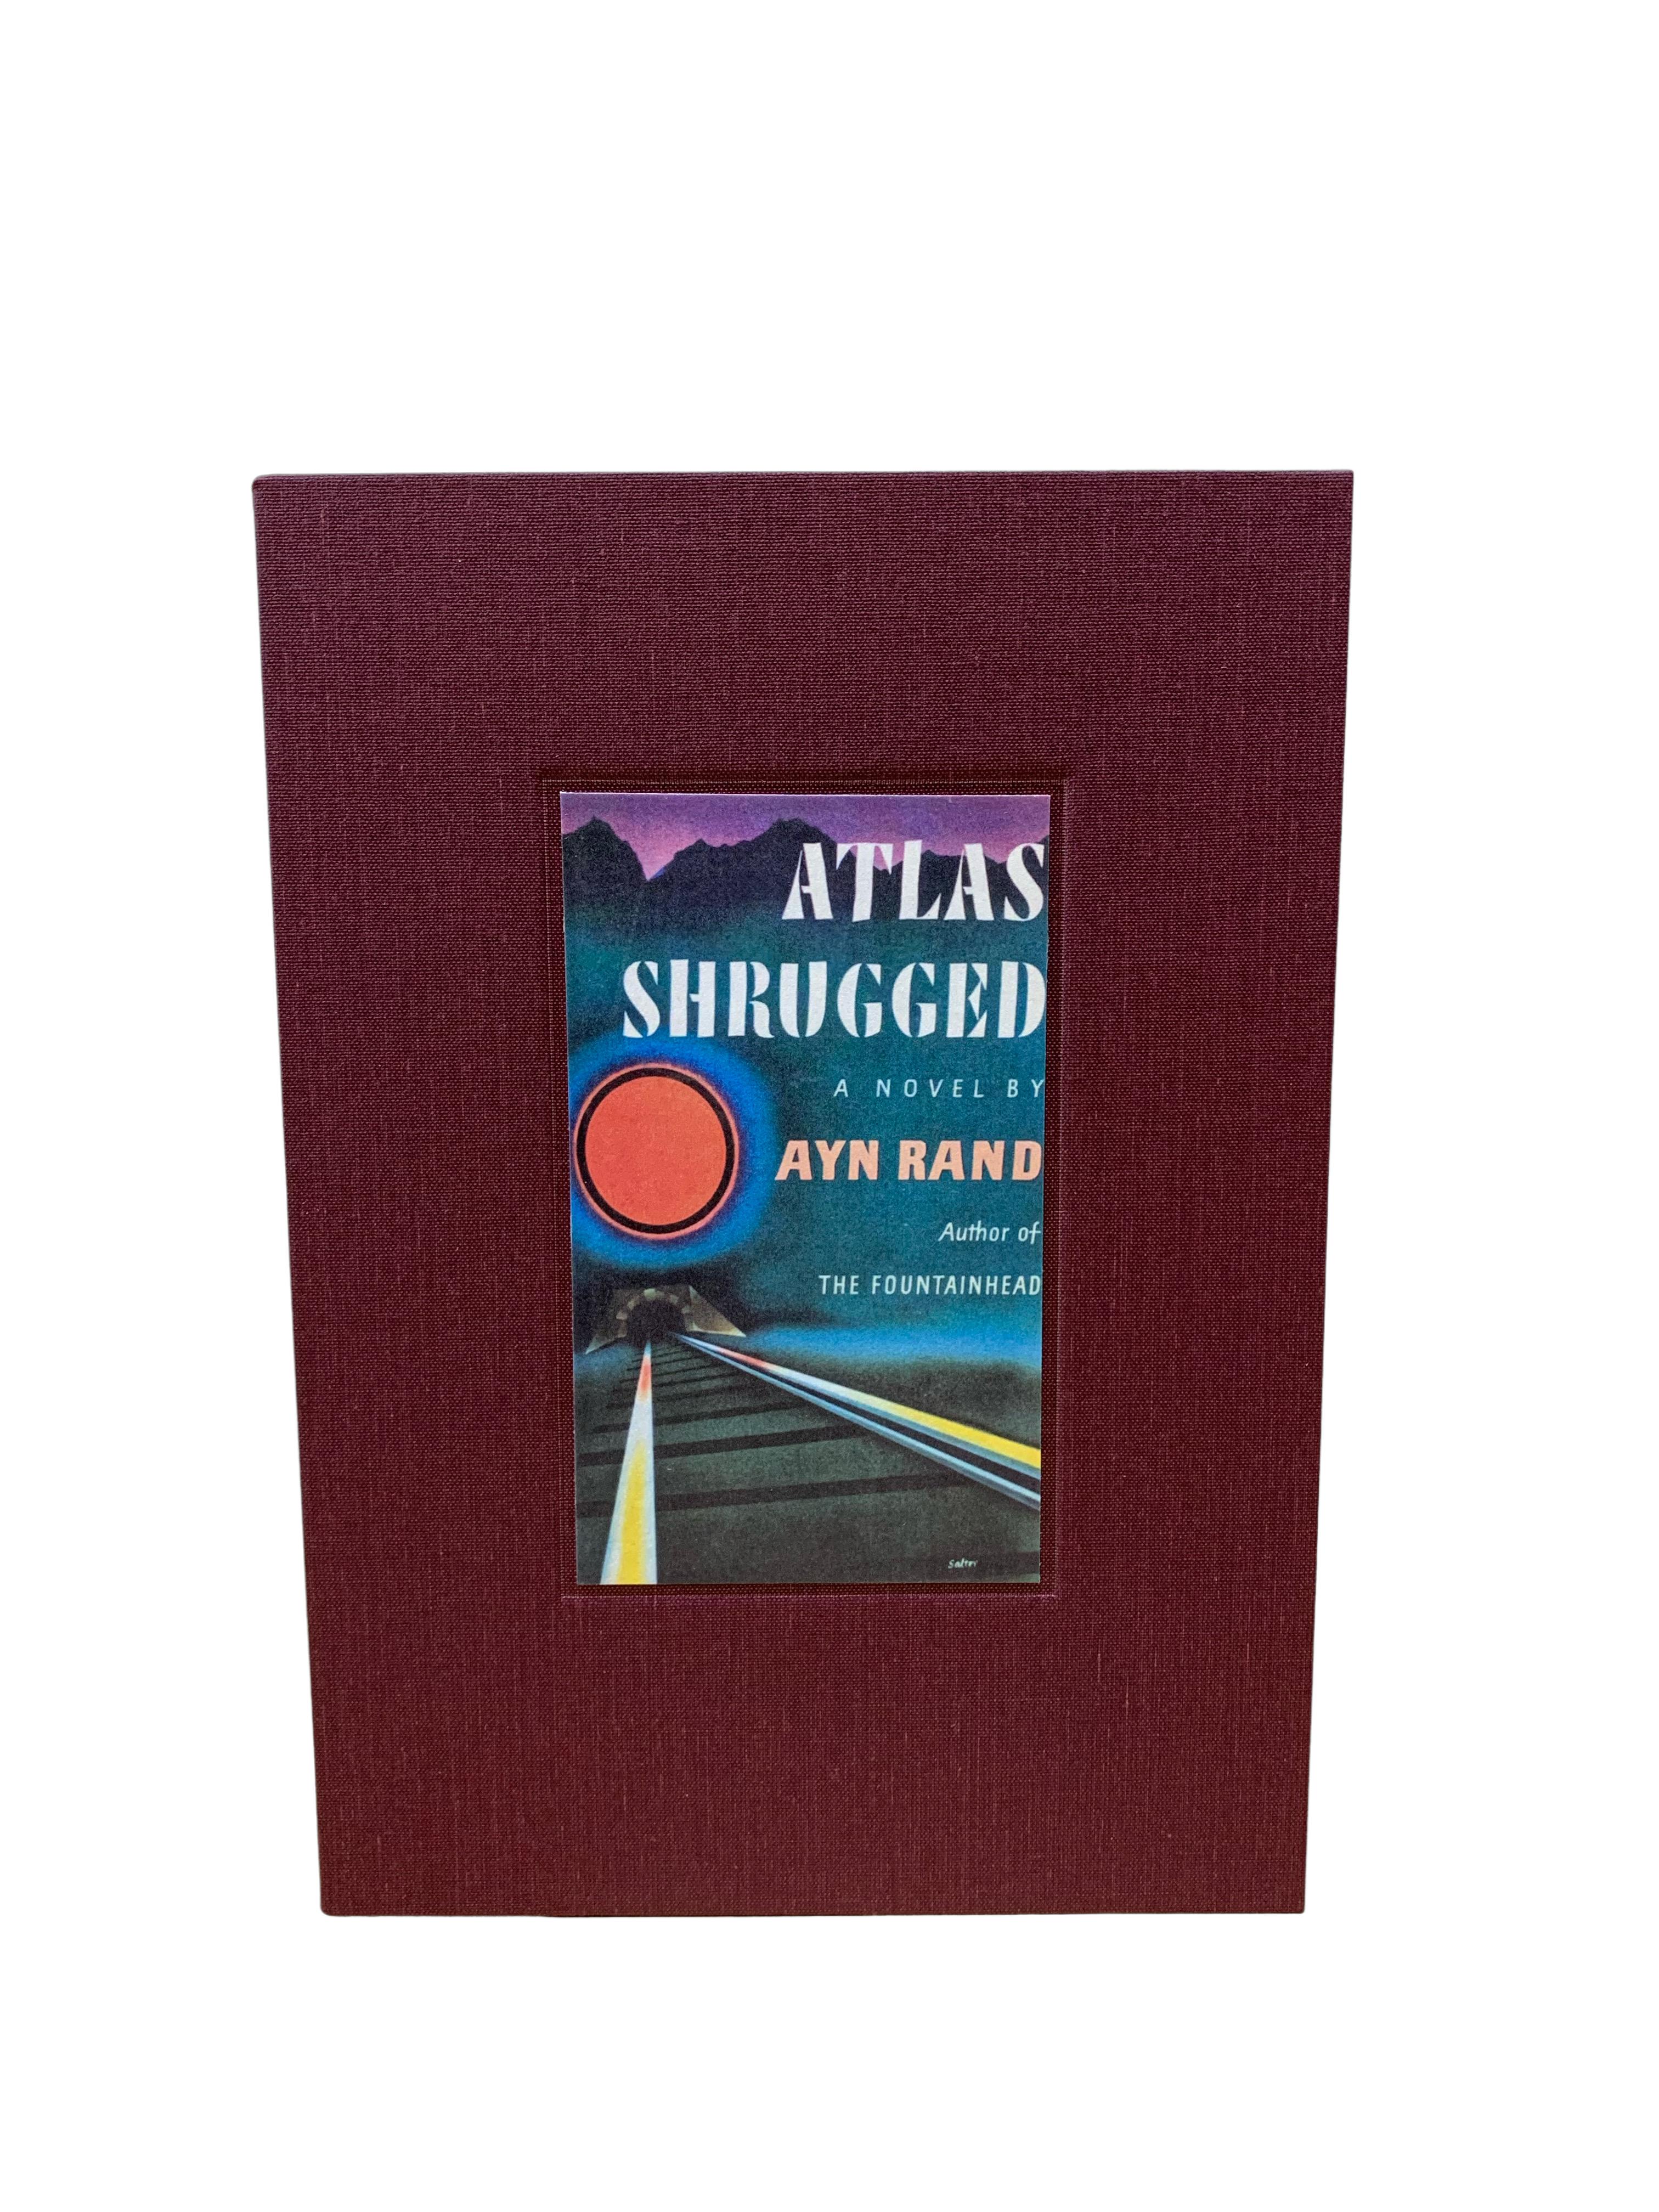 Leather Atlas Shrugged by Ayn Rand, First Edition, First Printing, 1957